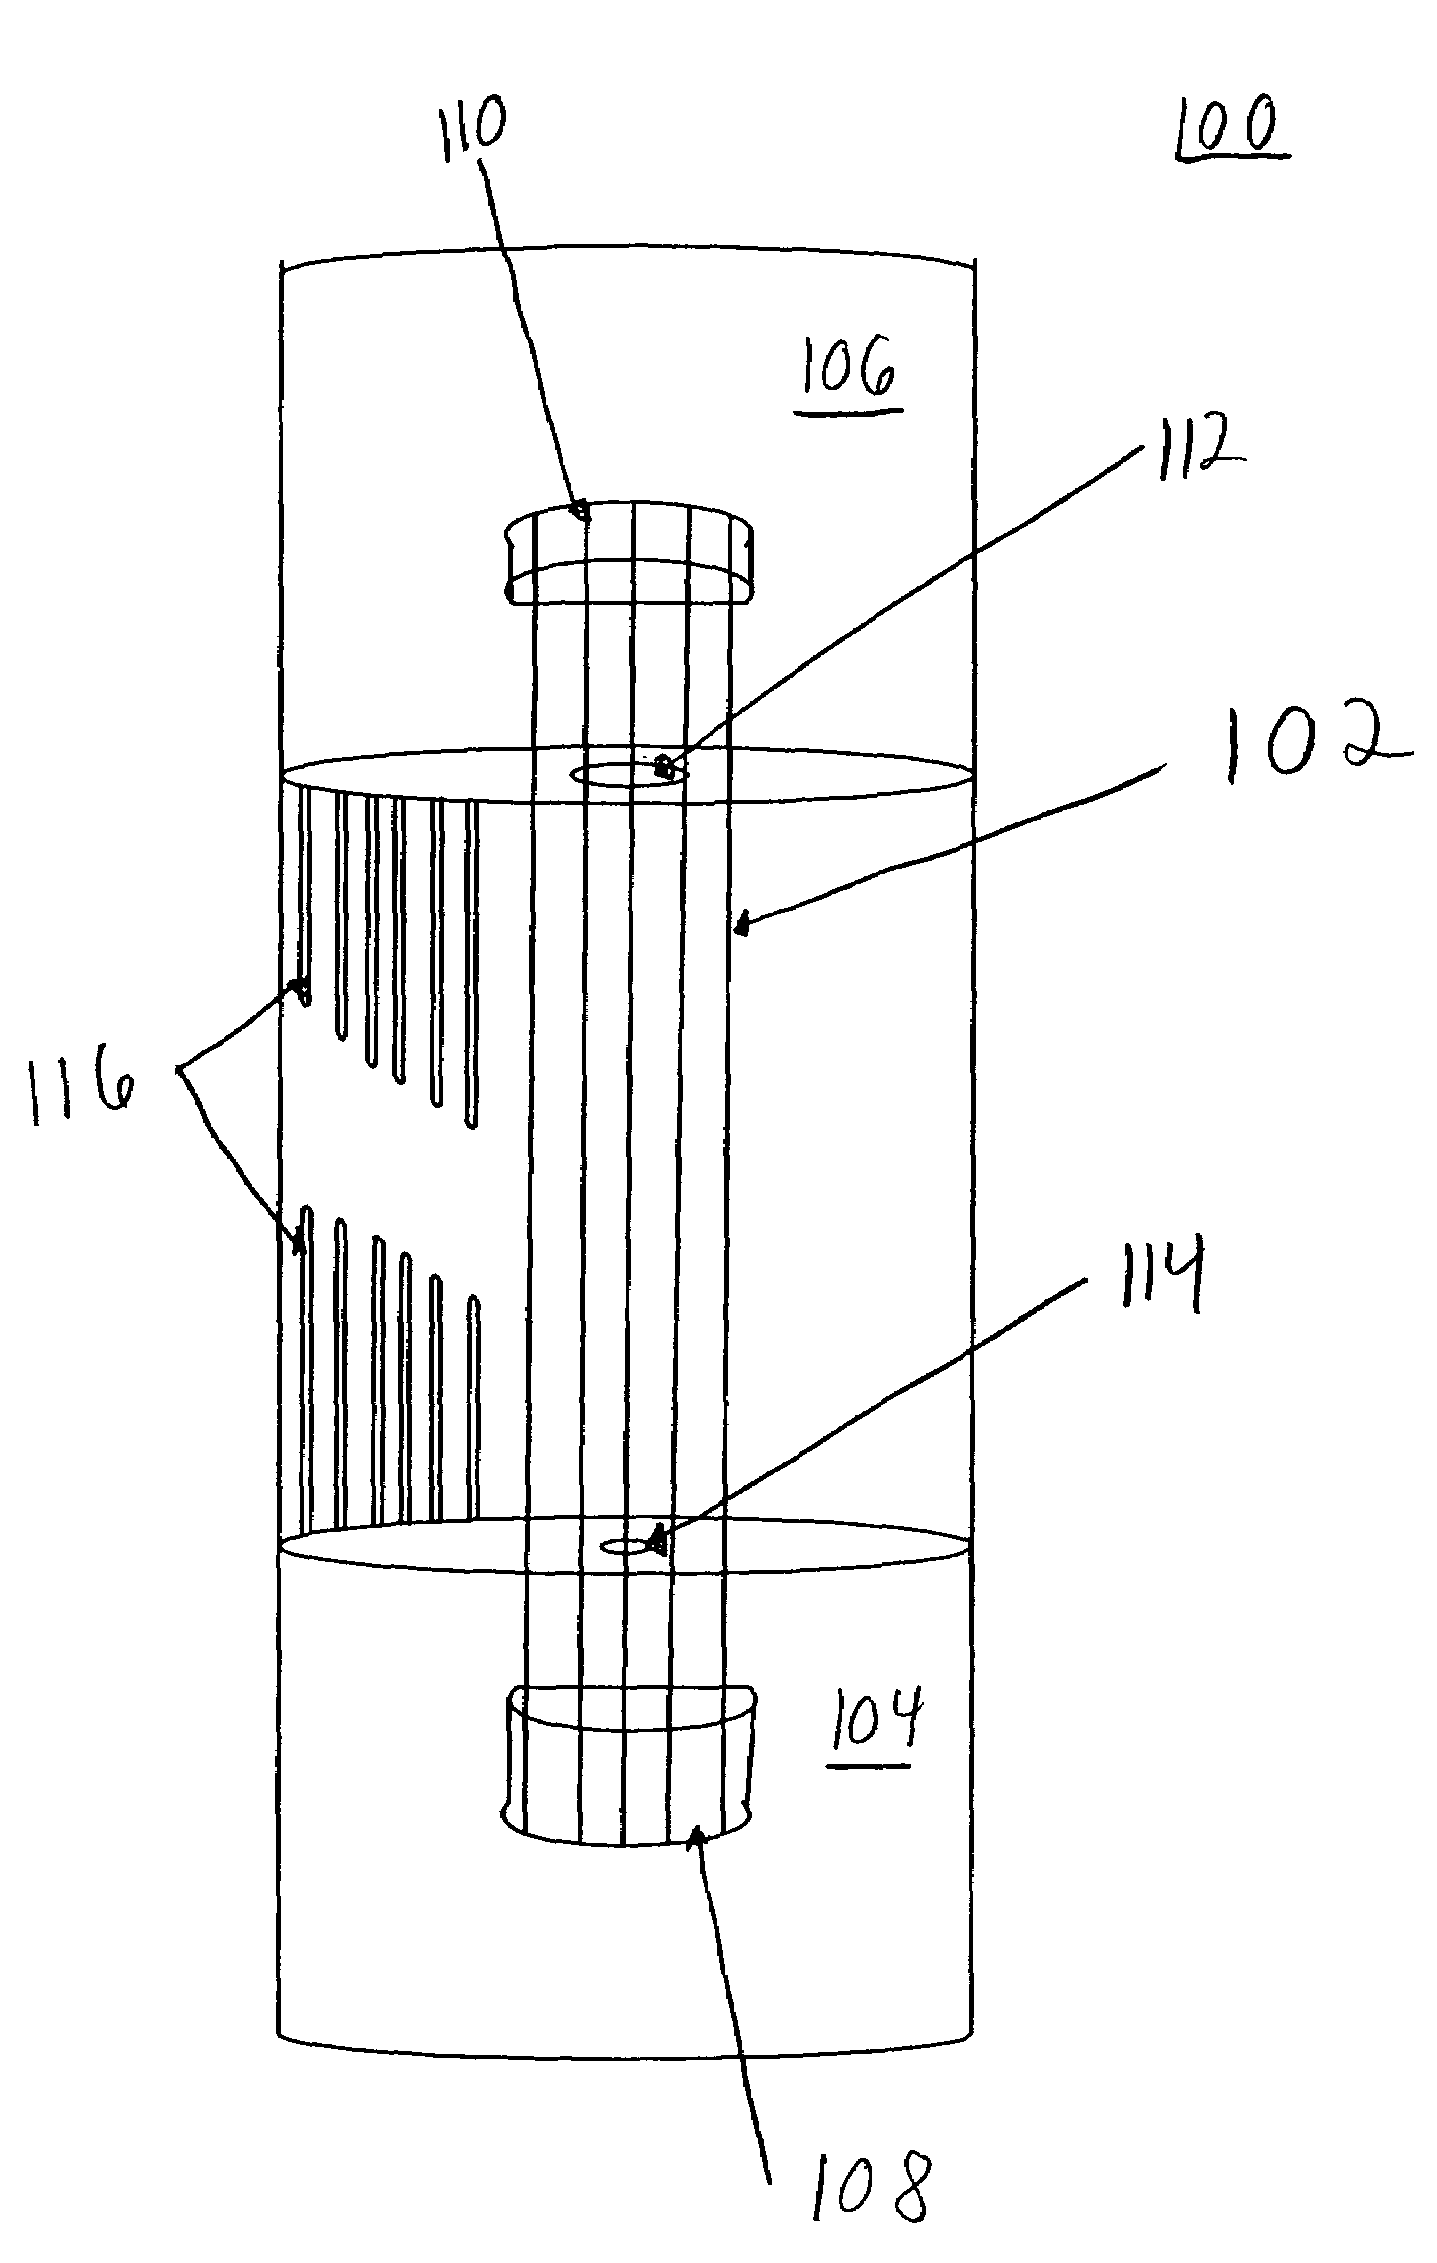 Musical instrument with multiple resonance chambers